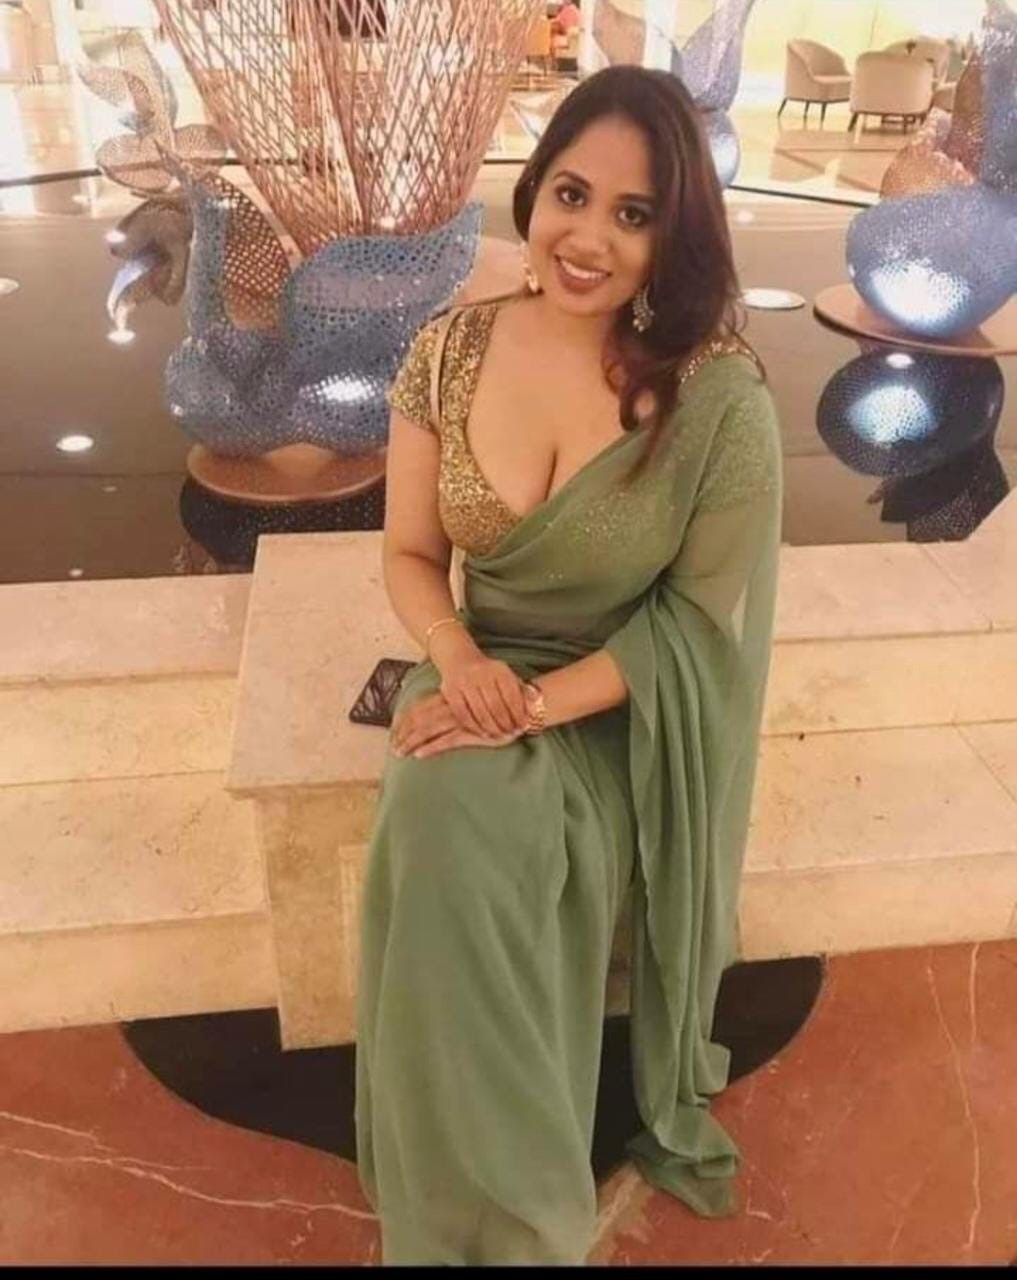 &KALYAN🔥HOT&SEXY BEST CALL GIRL AVAILABLE SAFE HOTEL&HOME